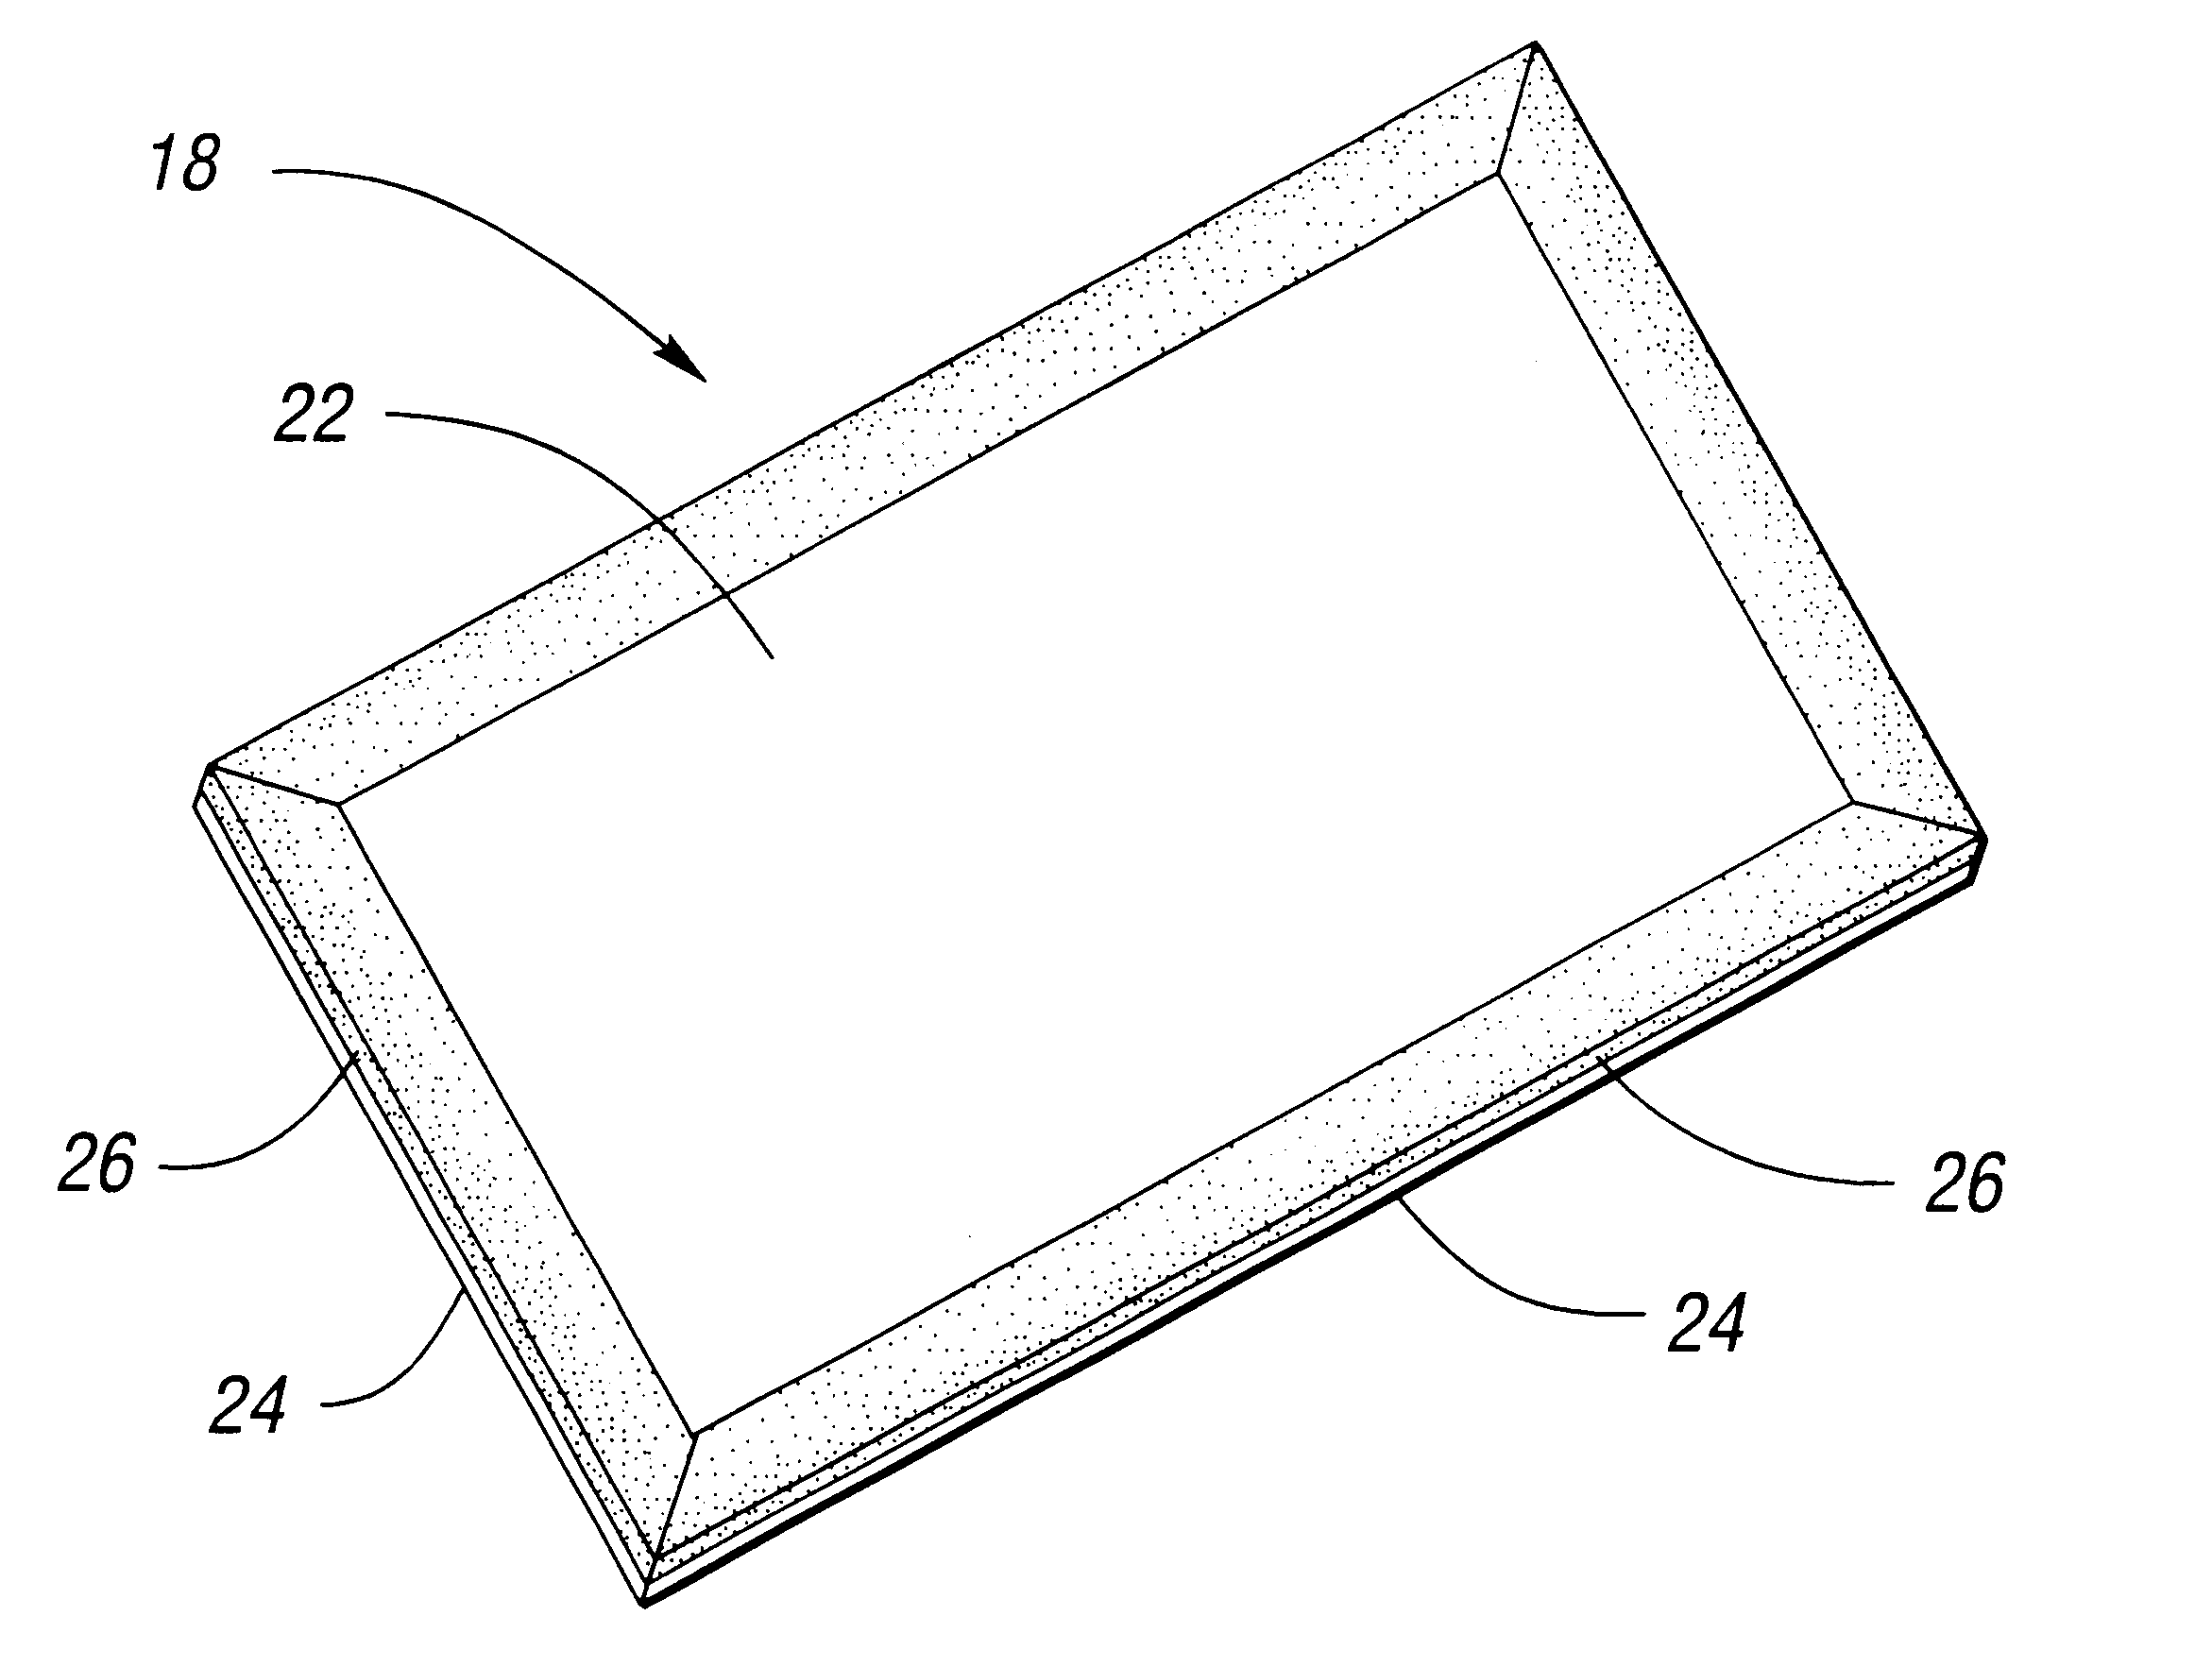 Damped structural panel and method of making same